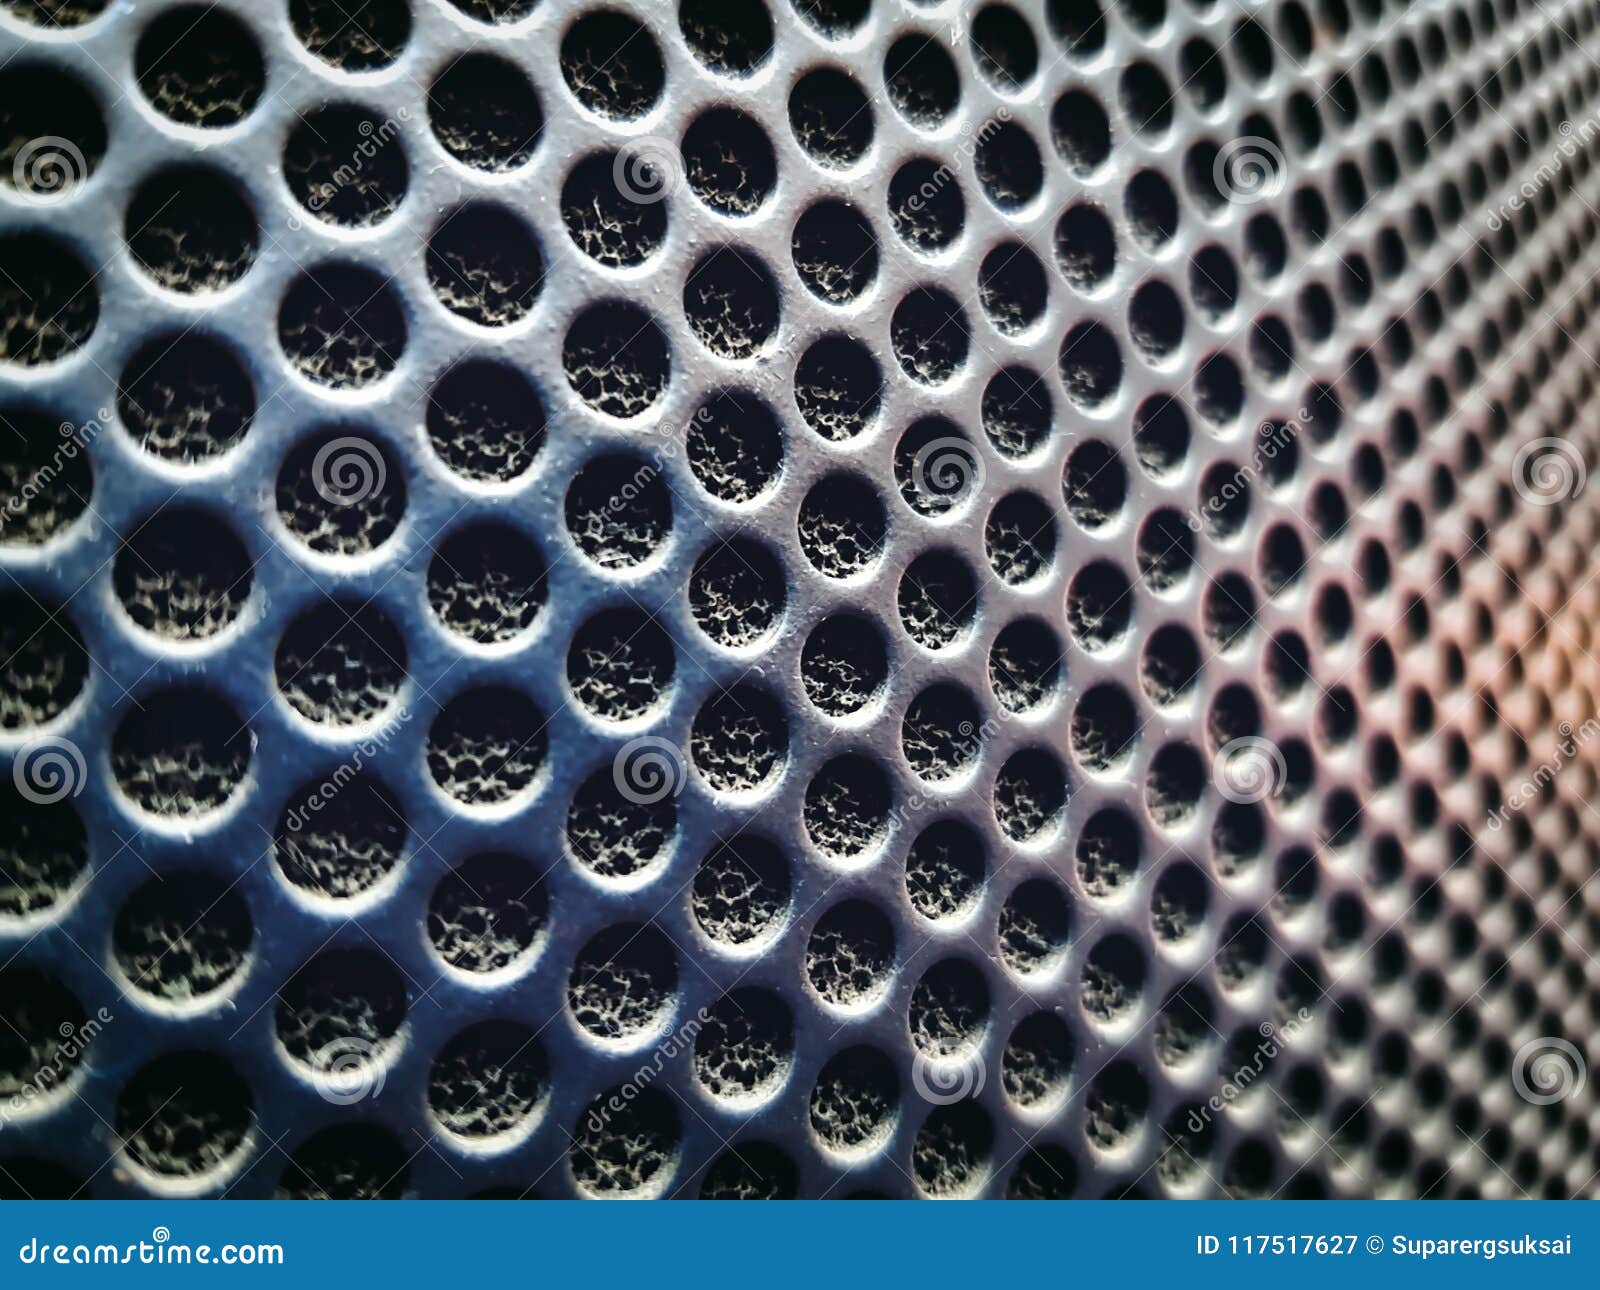 Background Of Perforated Audio Speaker Texture Stock Image